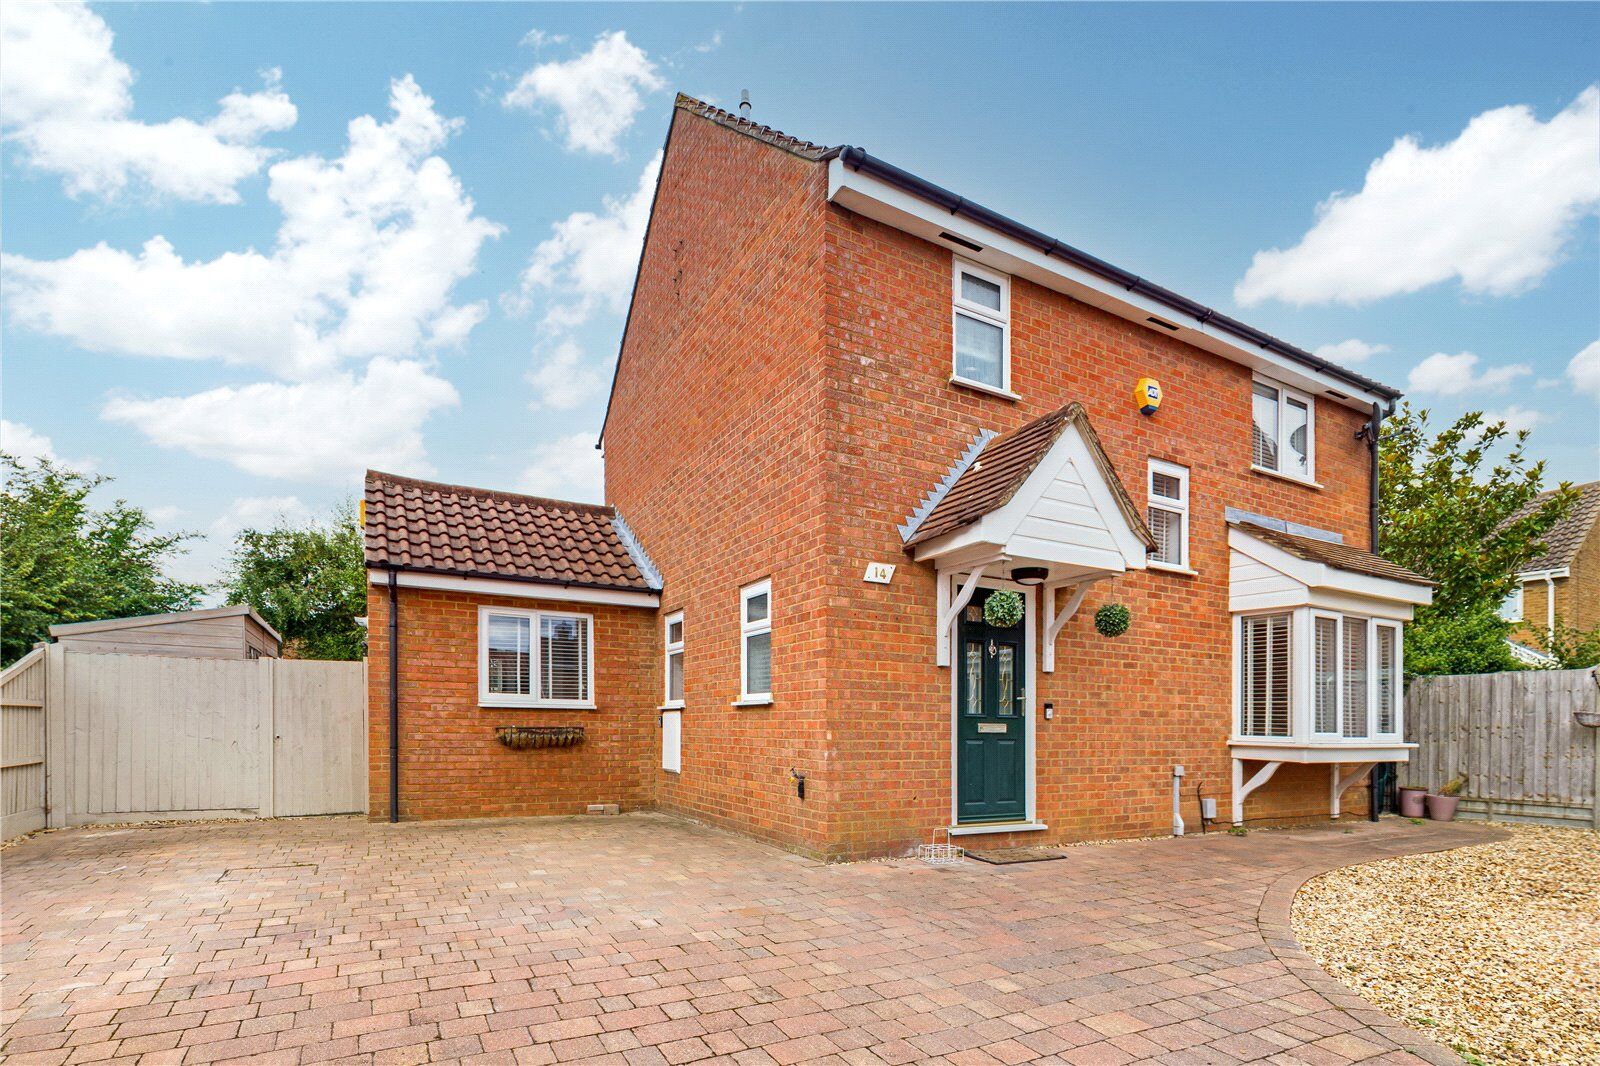 3 bedroom detached house for sale Lincoln Crescent, SG18, main image